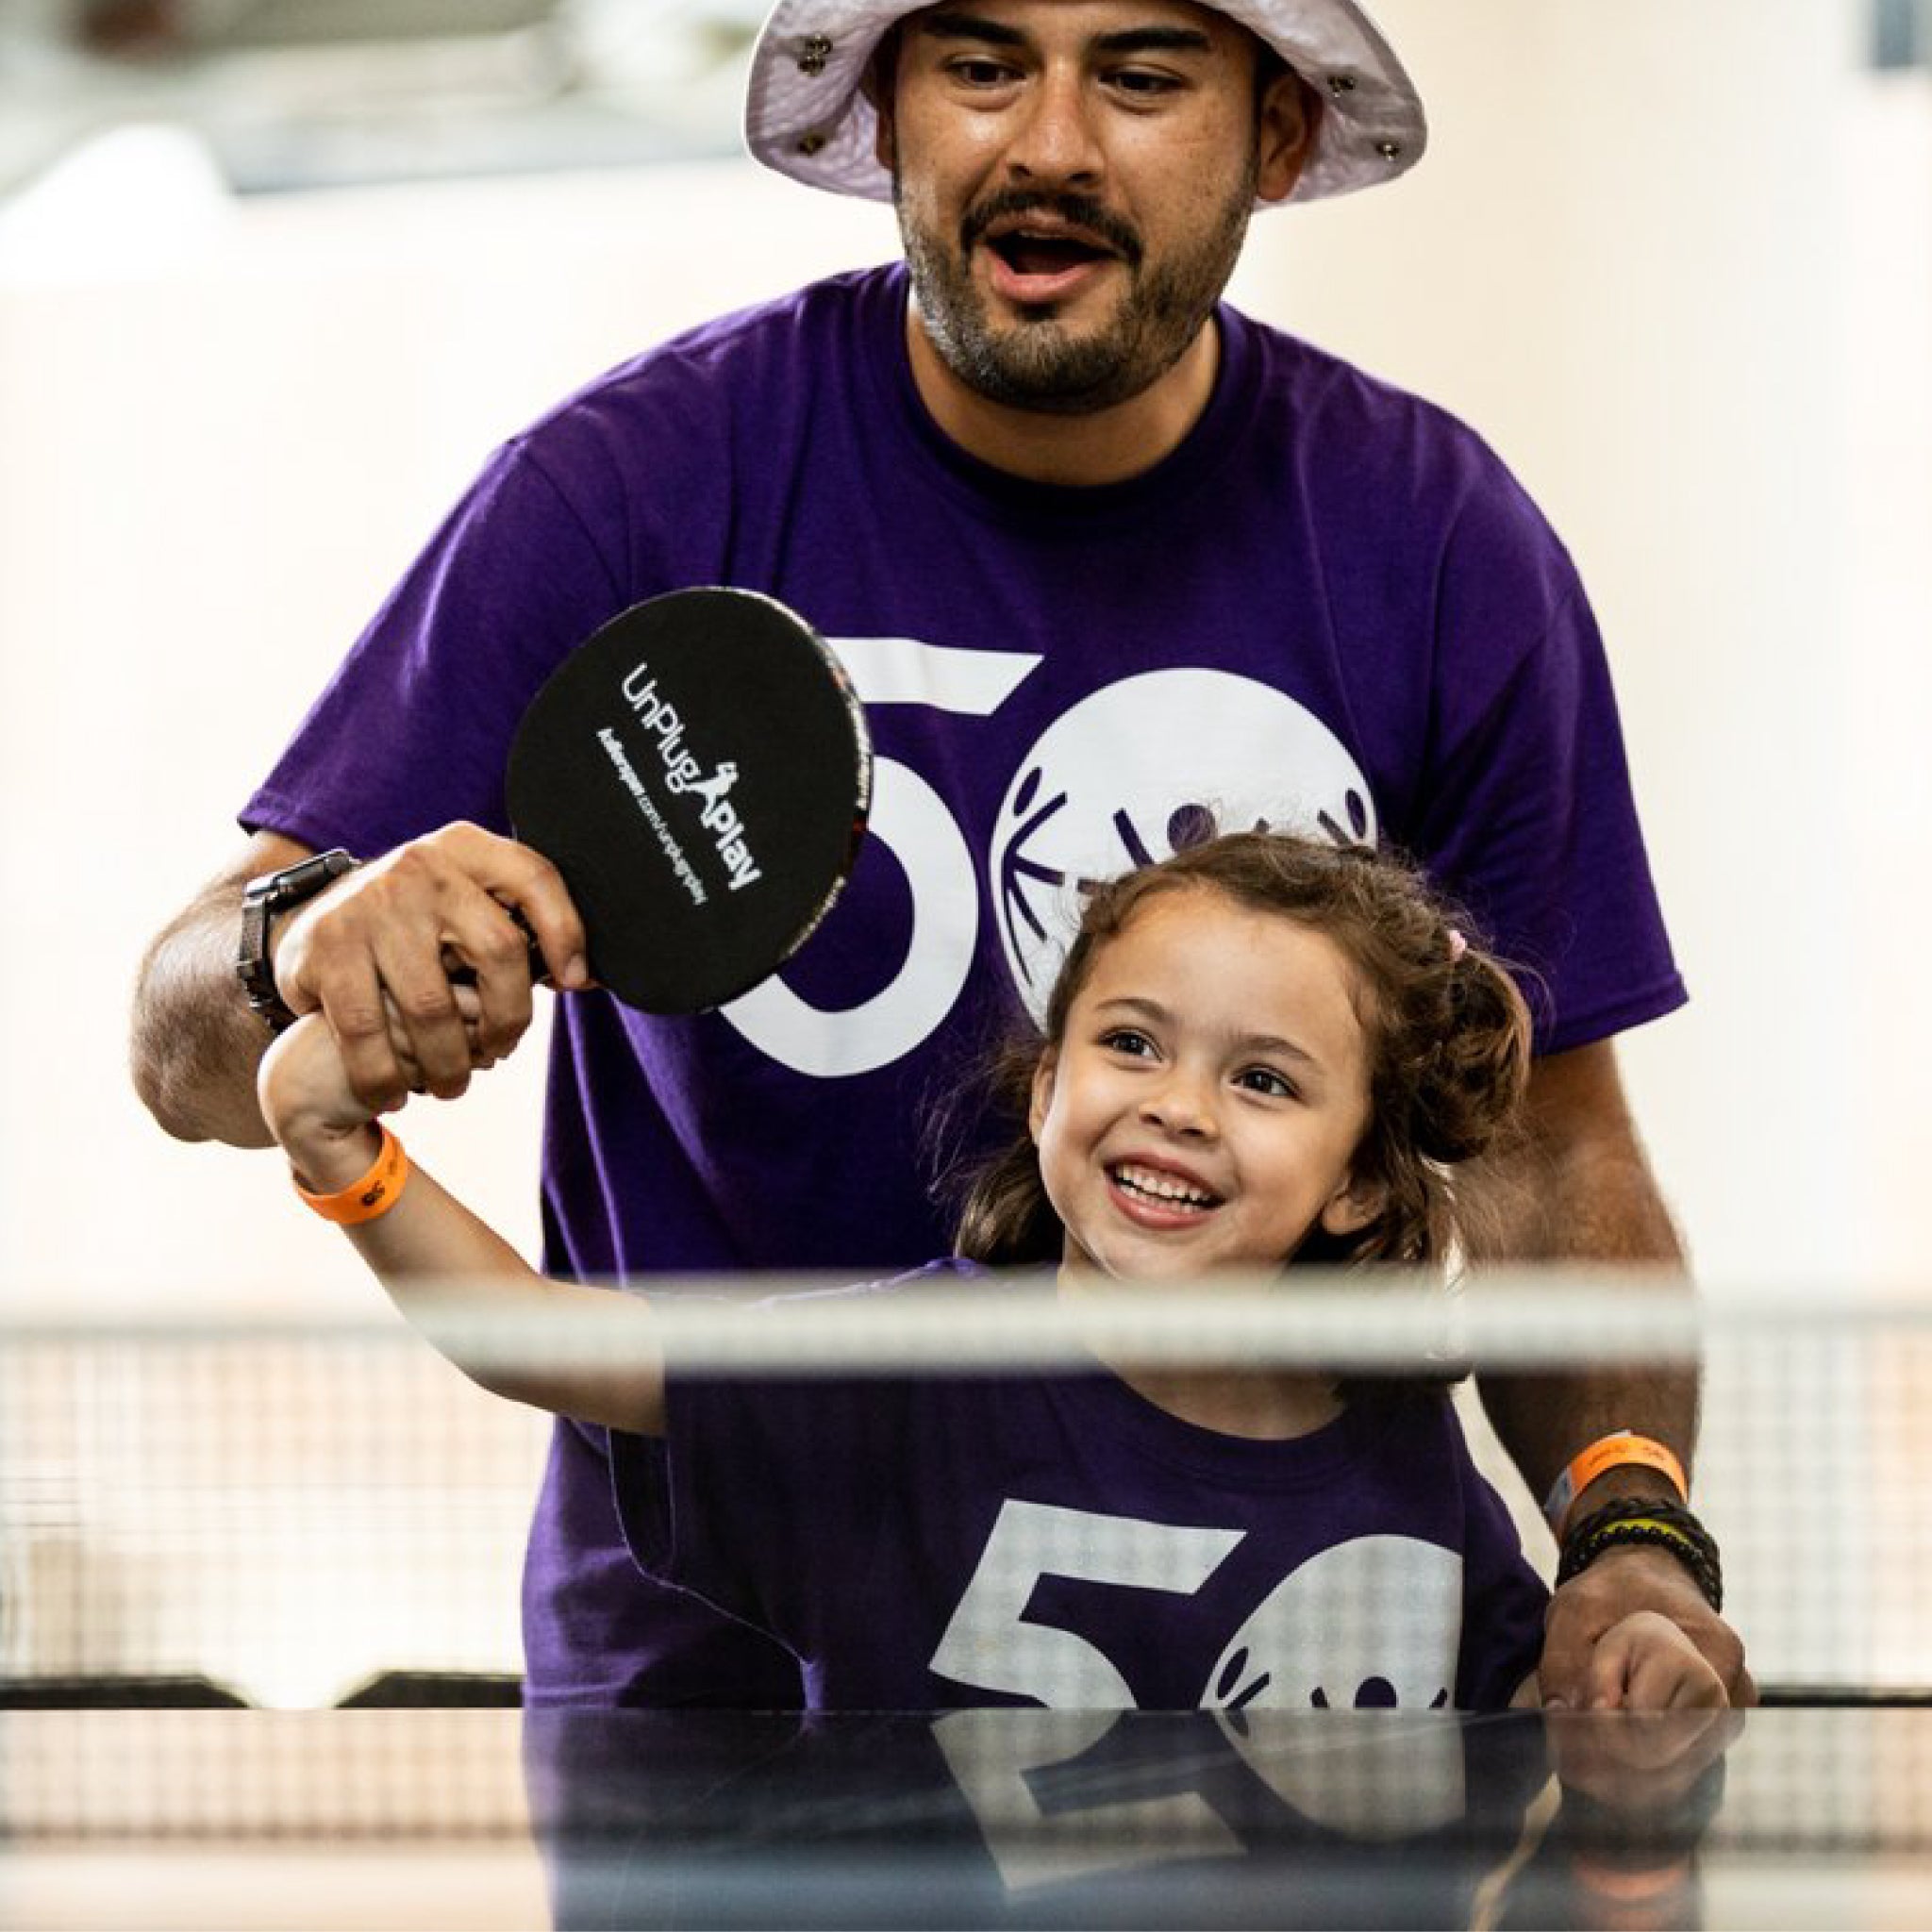 How Table Tennis Can Help Bring Families Together